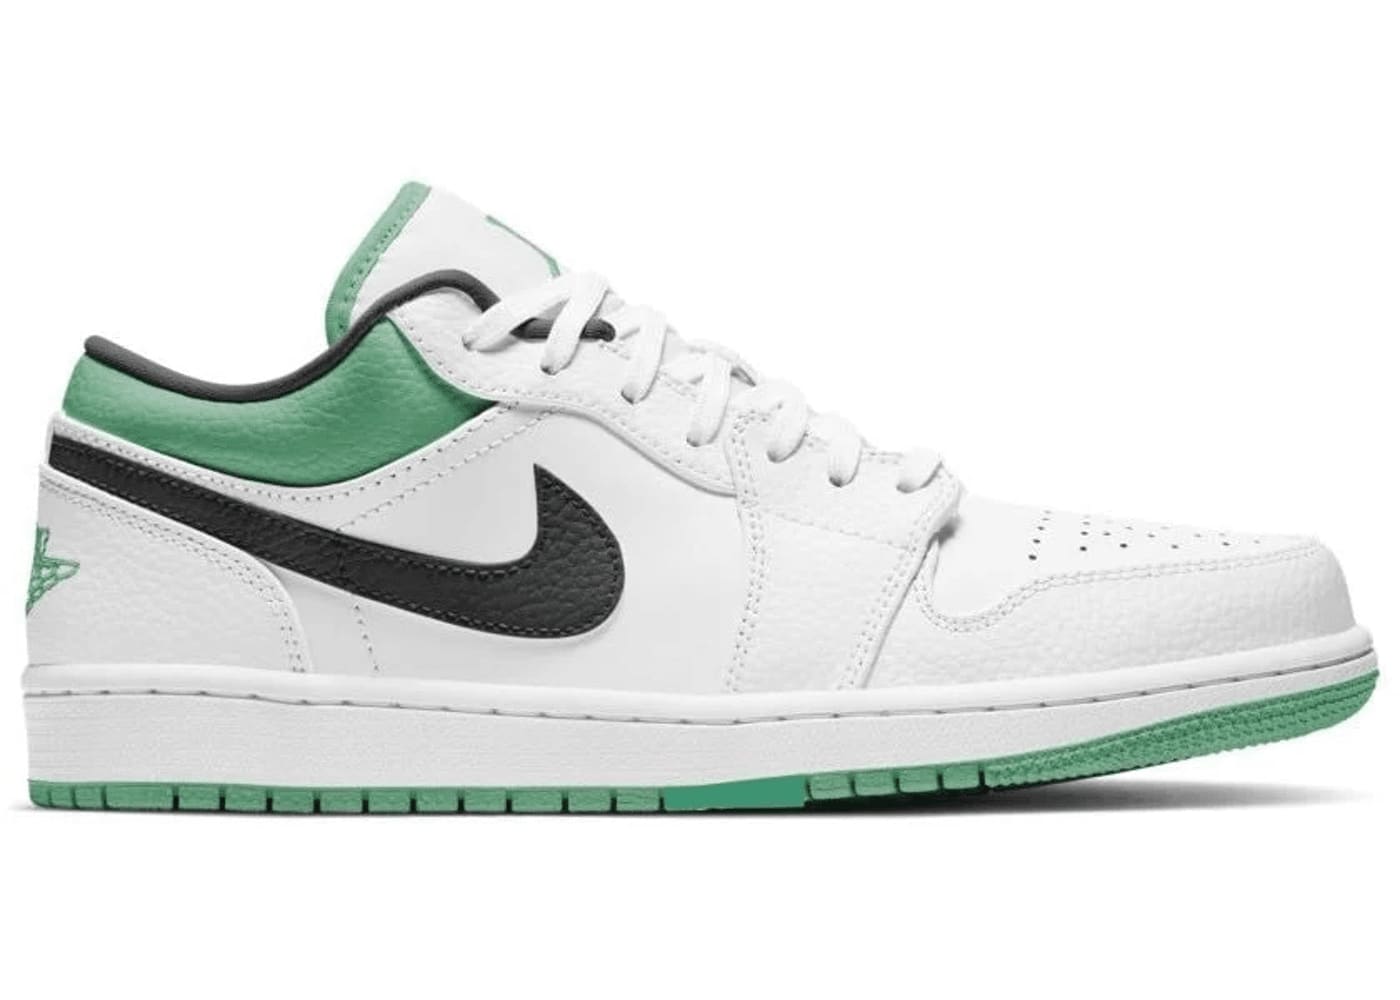 Jordan 1 Low White Lucky Green Tumbled Leather (GS)